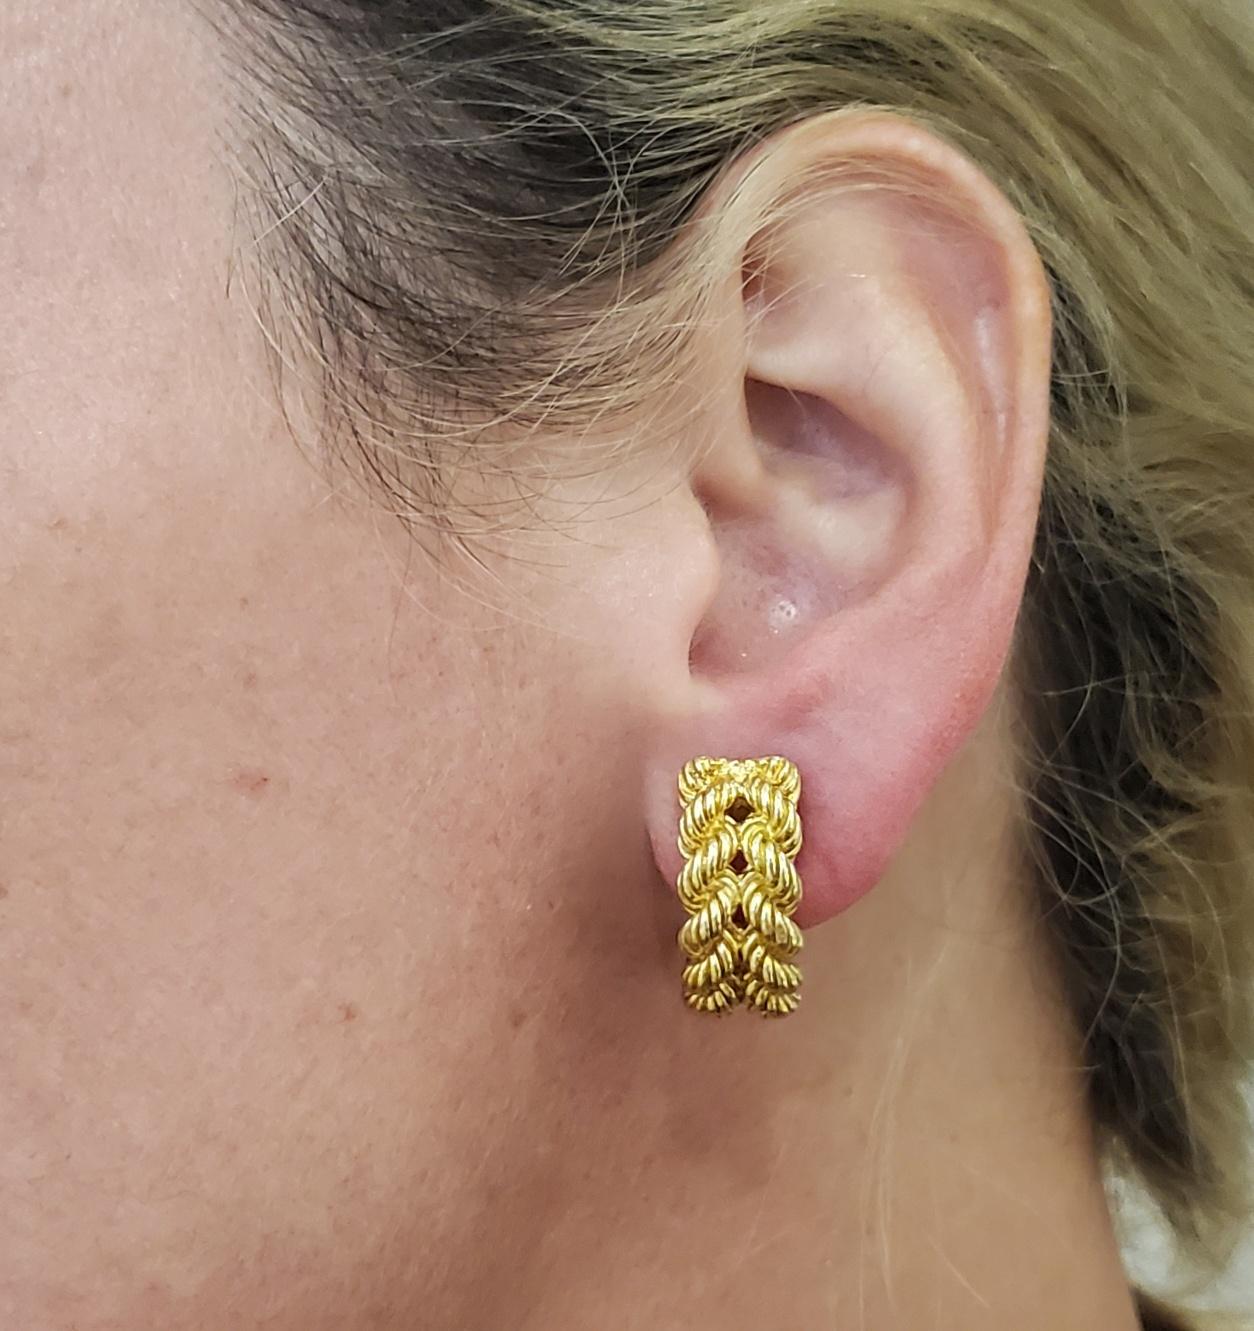 Clips on earrings designed by Hermes.

Beautiful pair of clip-on earrings, created in Paris France by the luxury house of Hermes, back in the 1970's. They was crafted with twisted wires motifs in solid yellow gold of 18 karats and fitted with hinged